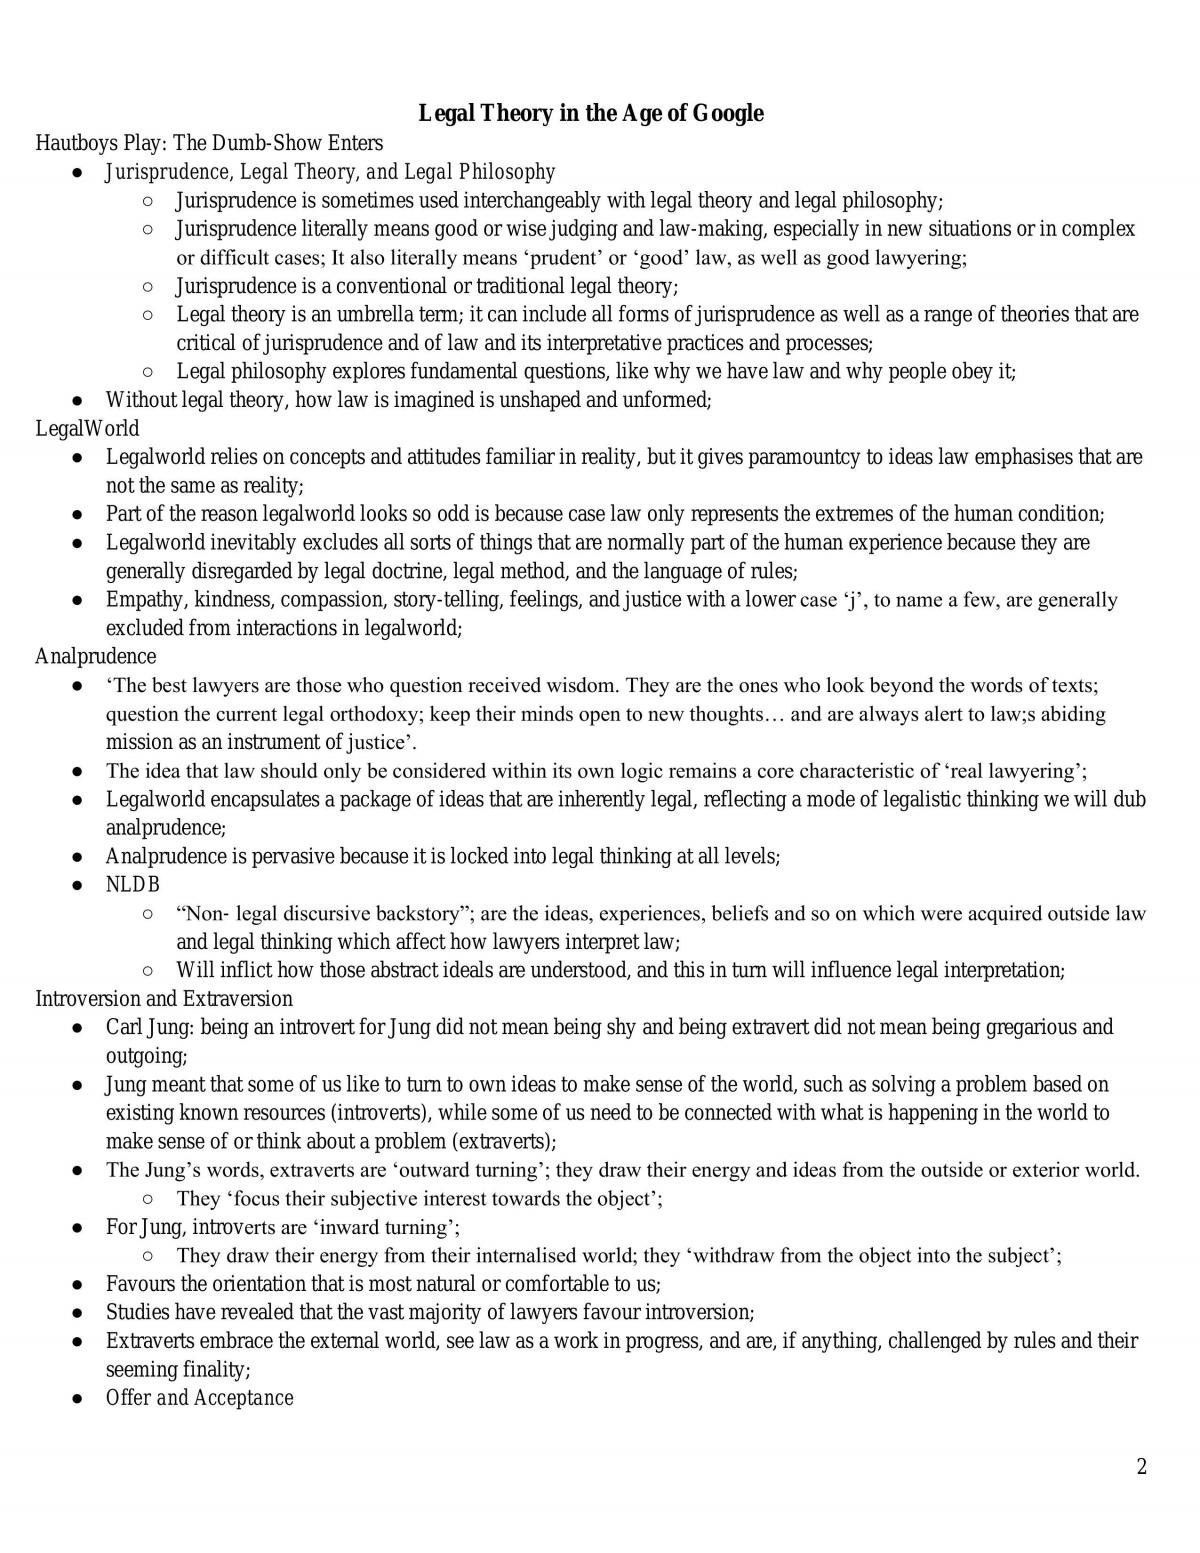 Legal Theory- Complete Summary  - Page 2